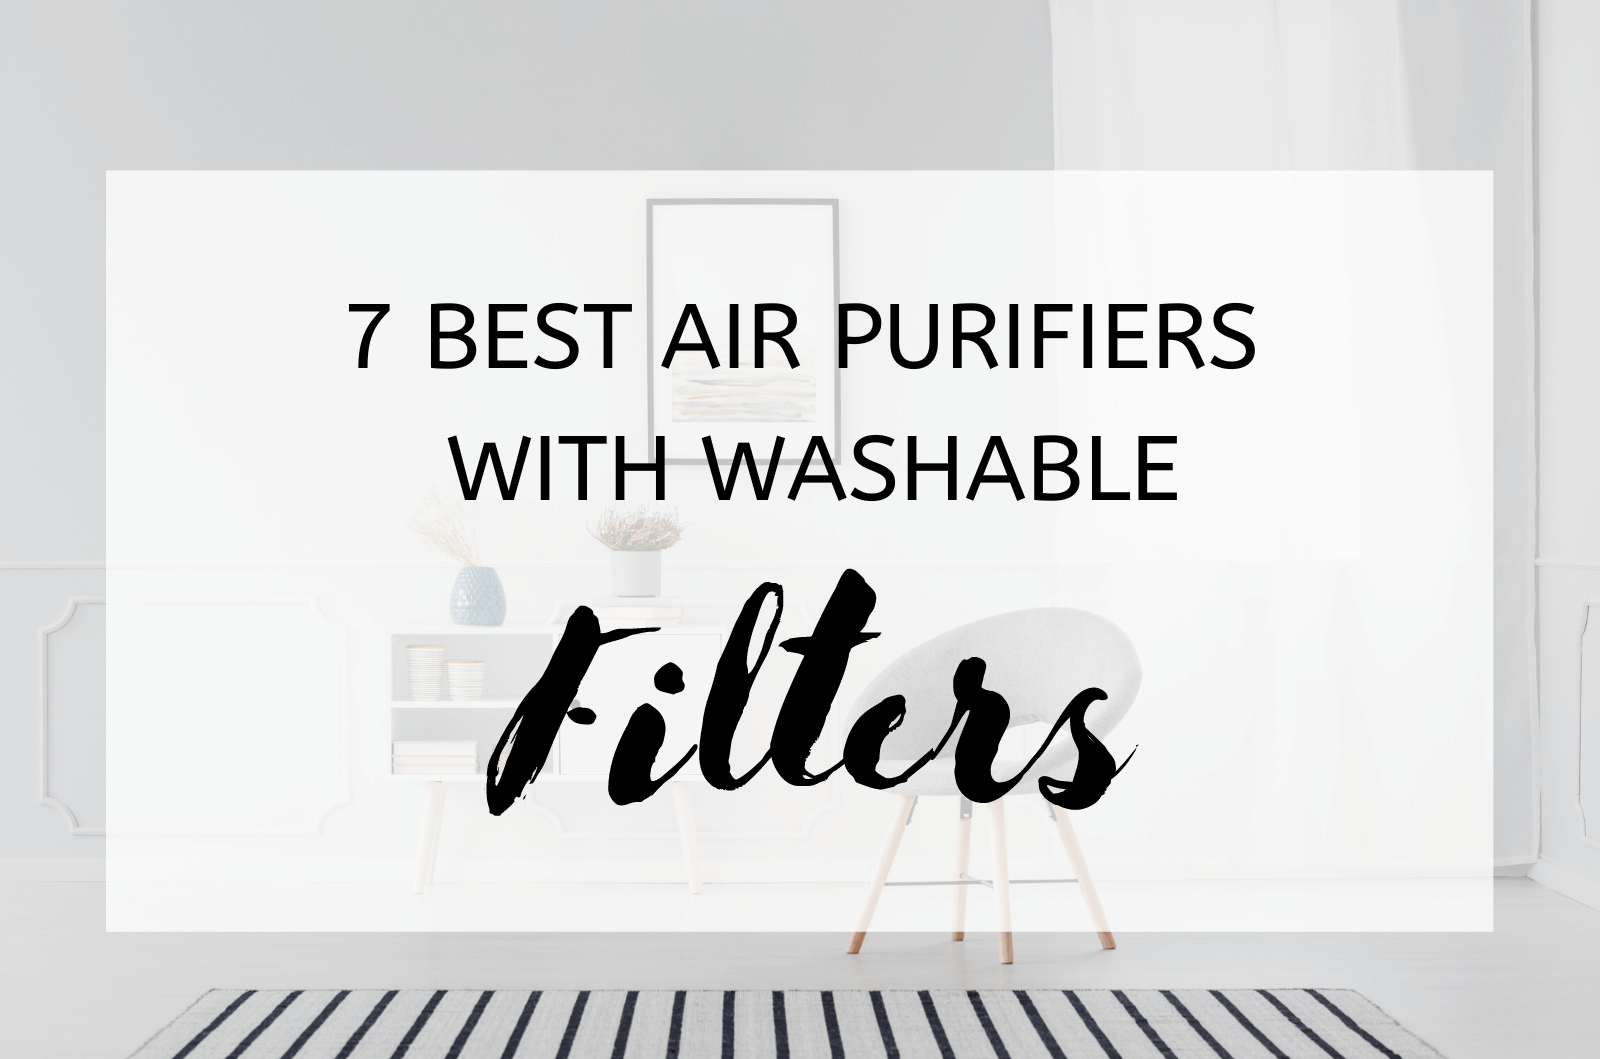 7 Best Air Purifiers With Washable Filters